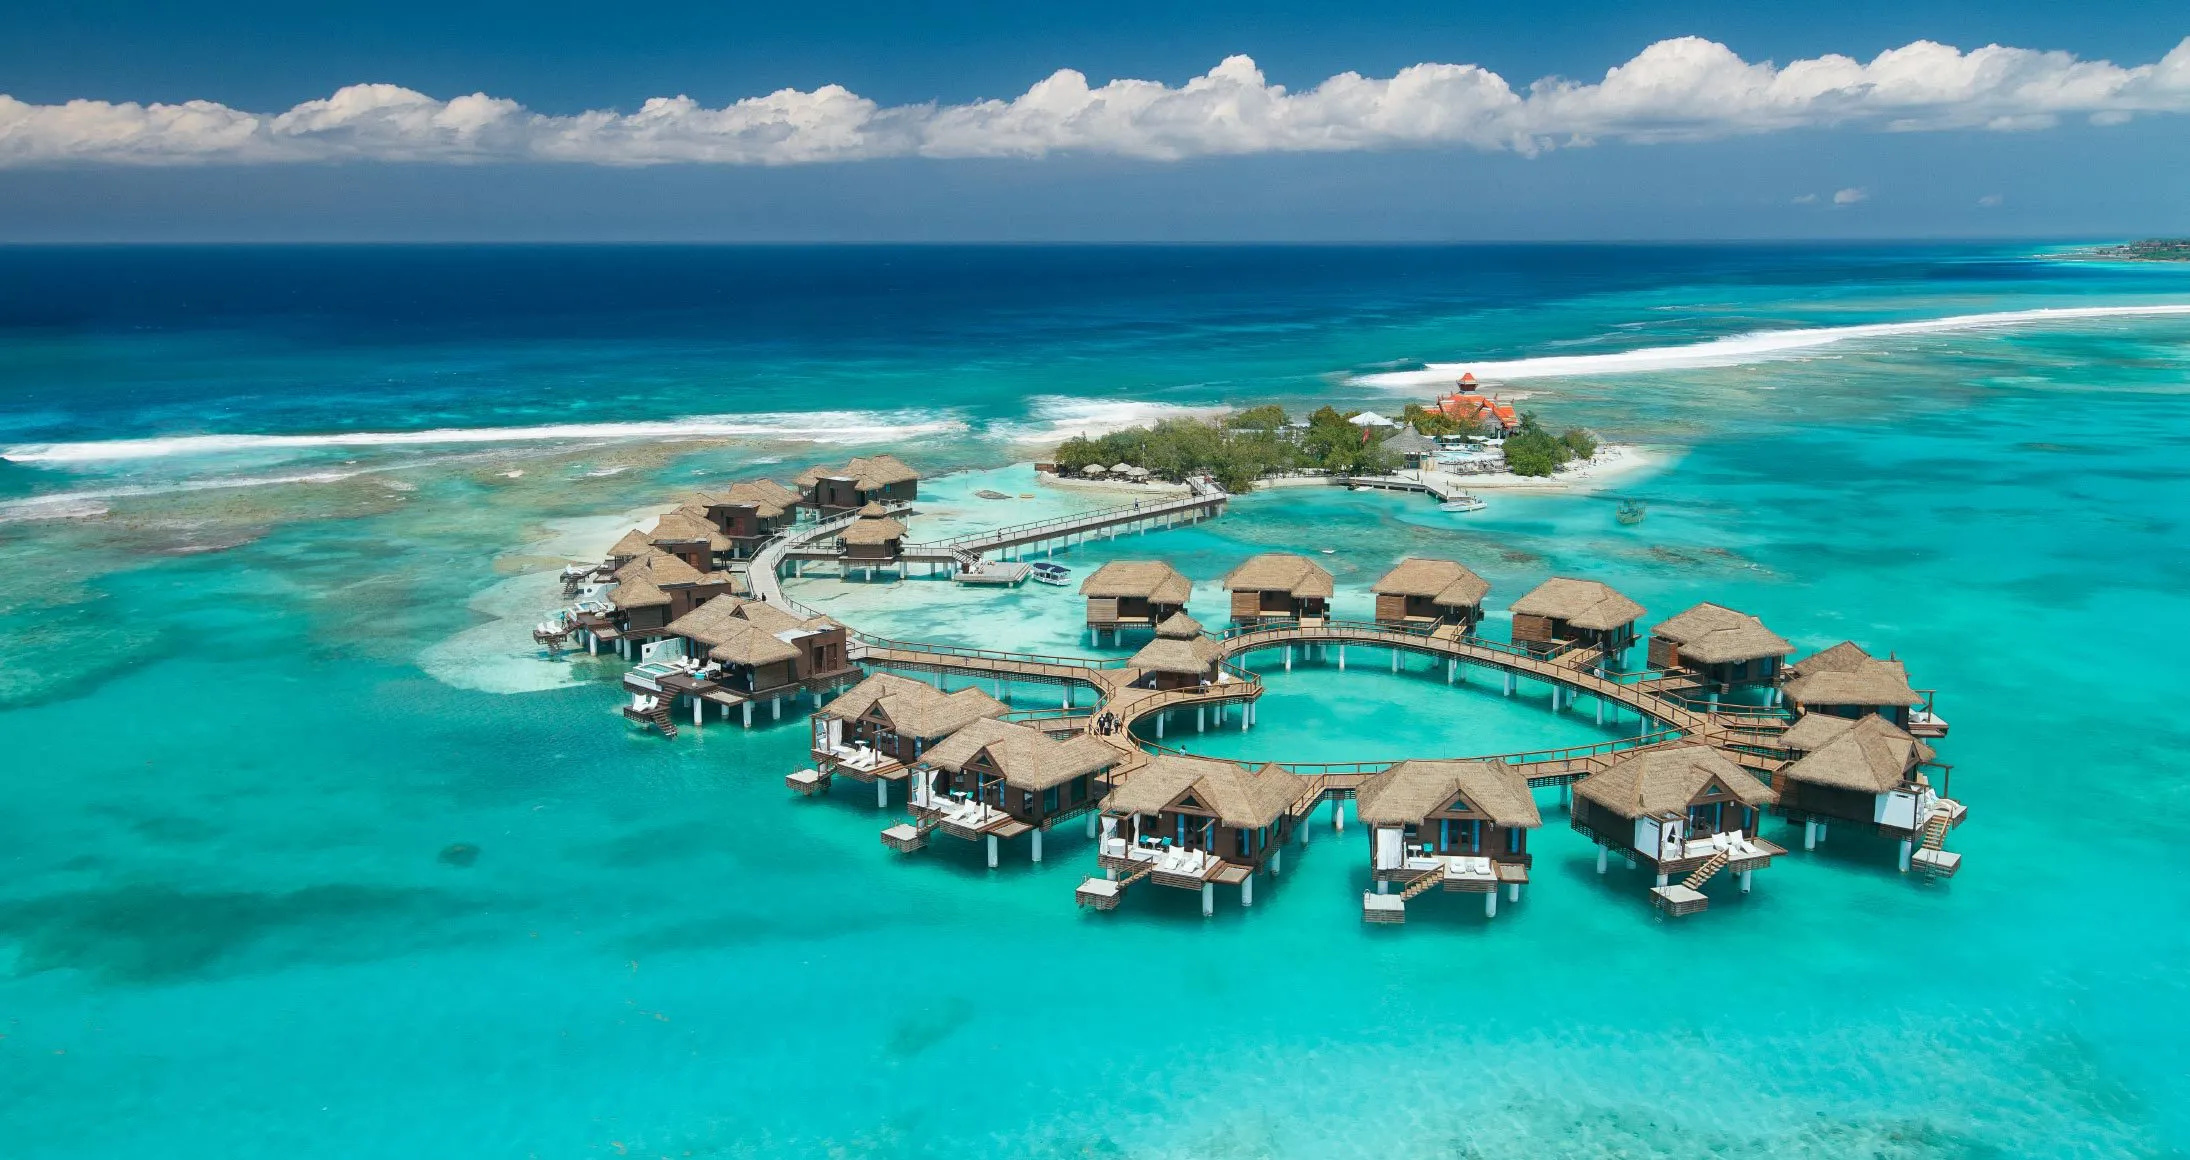 Bungalow: Jamaica's Sandals Royal Caribbean Resort, Private island, Overwater vacation houses. 2190x1160 HD Wallpaper.